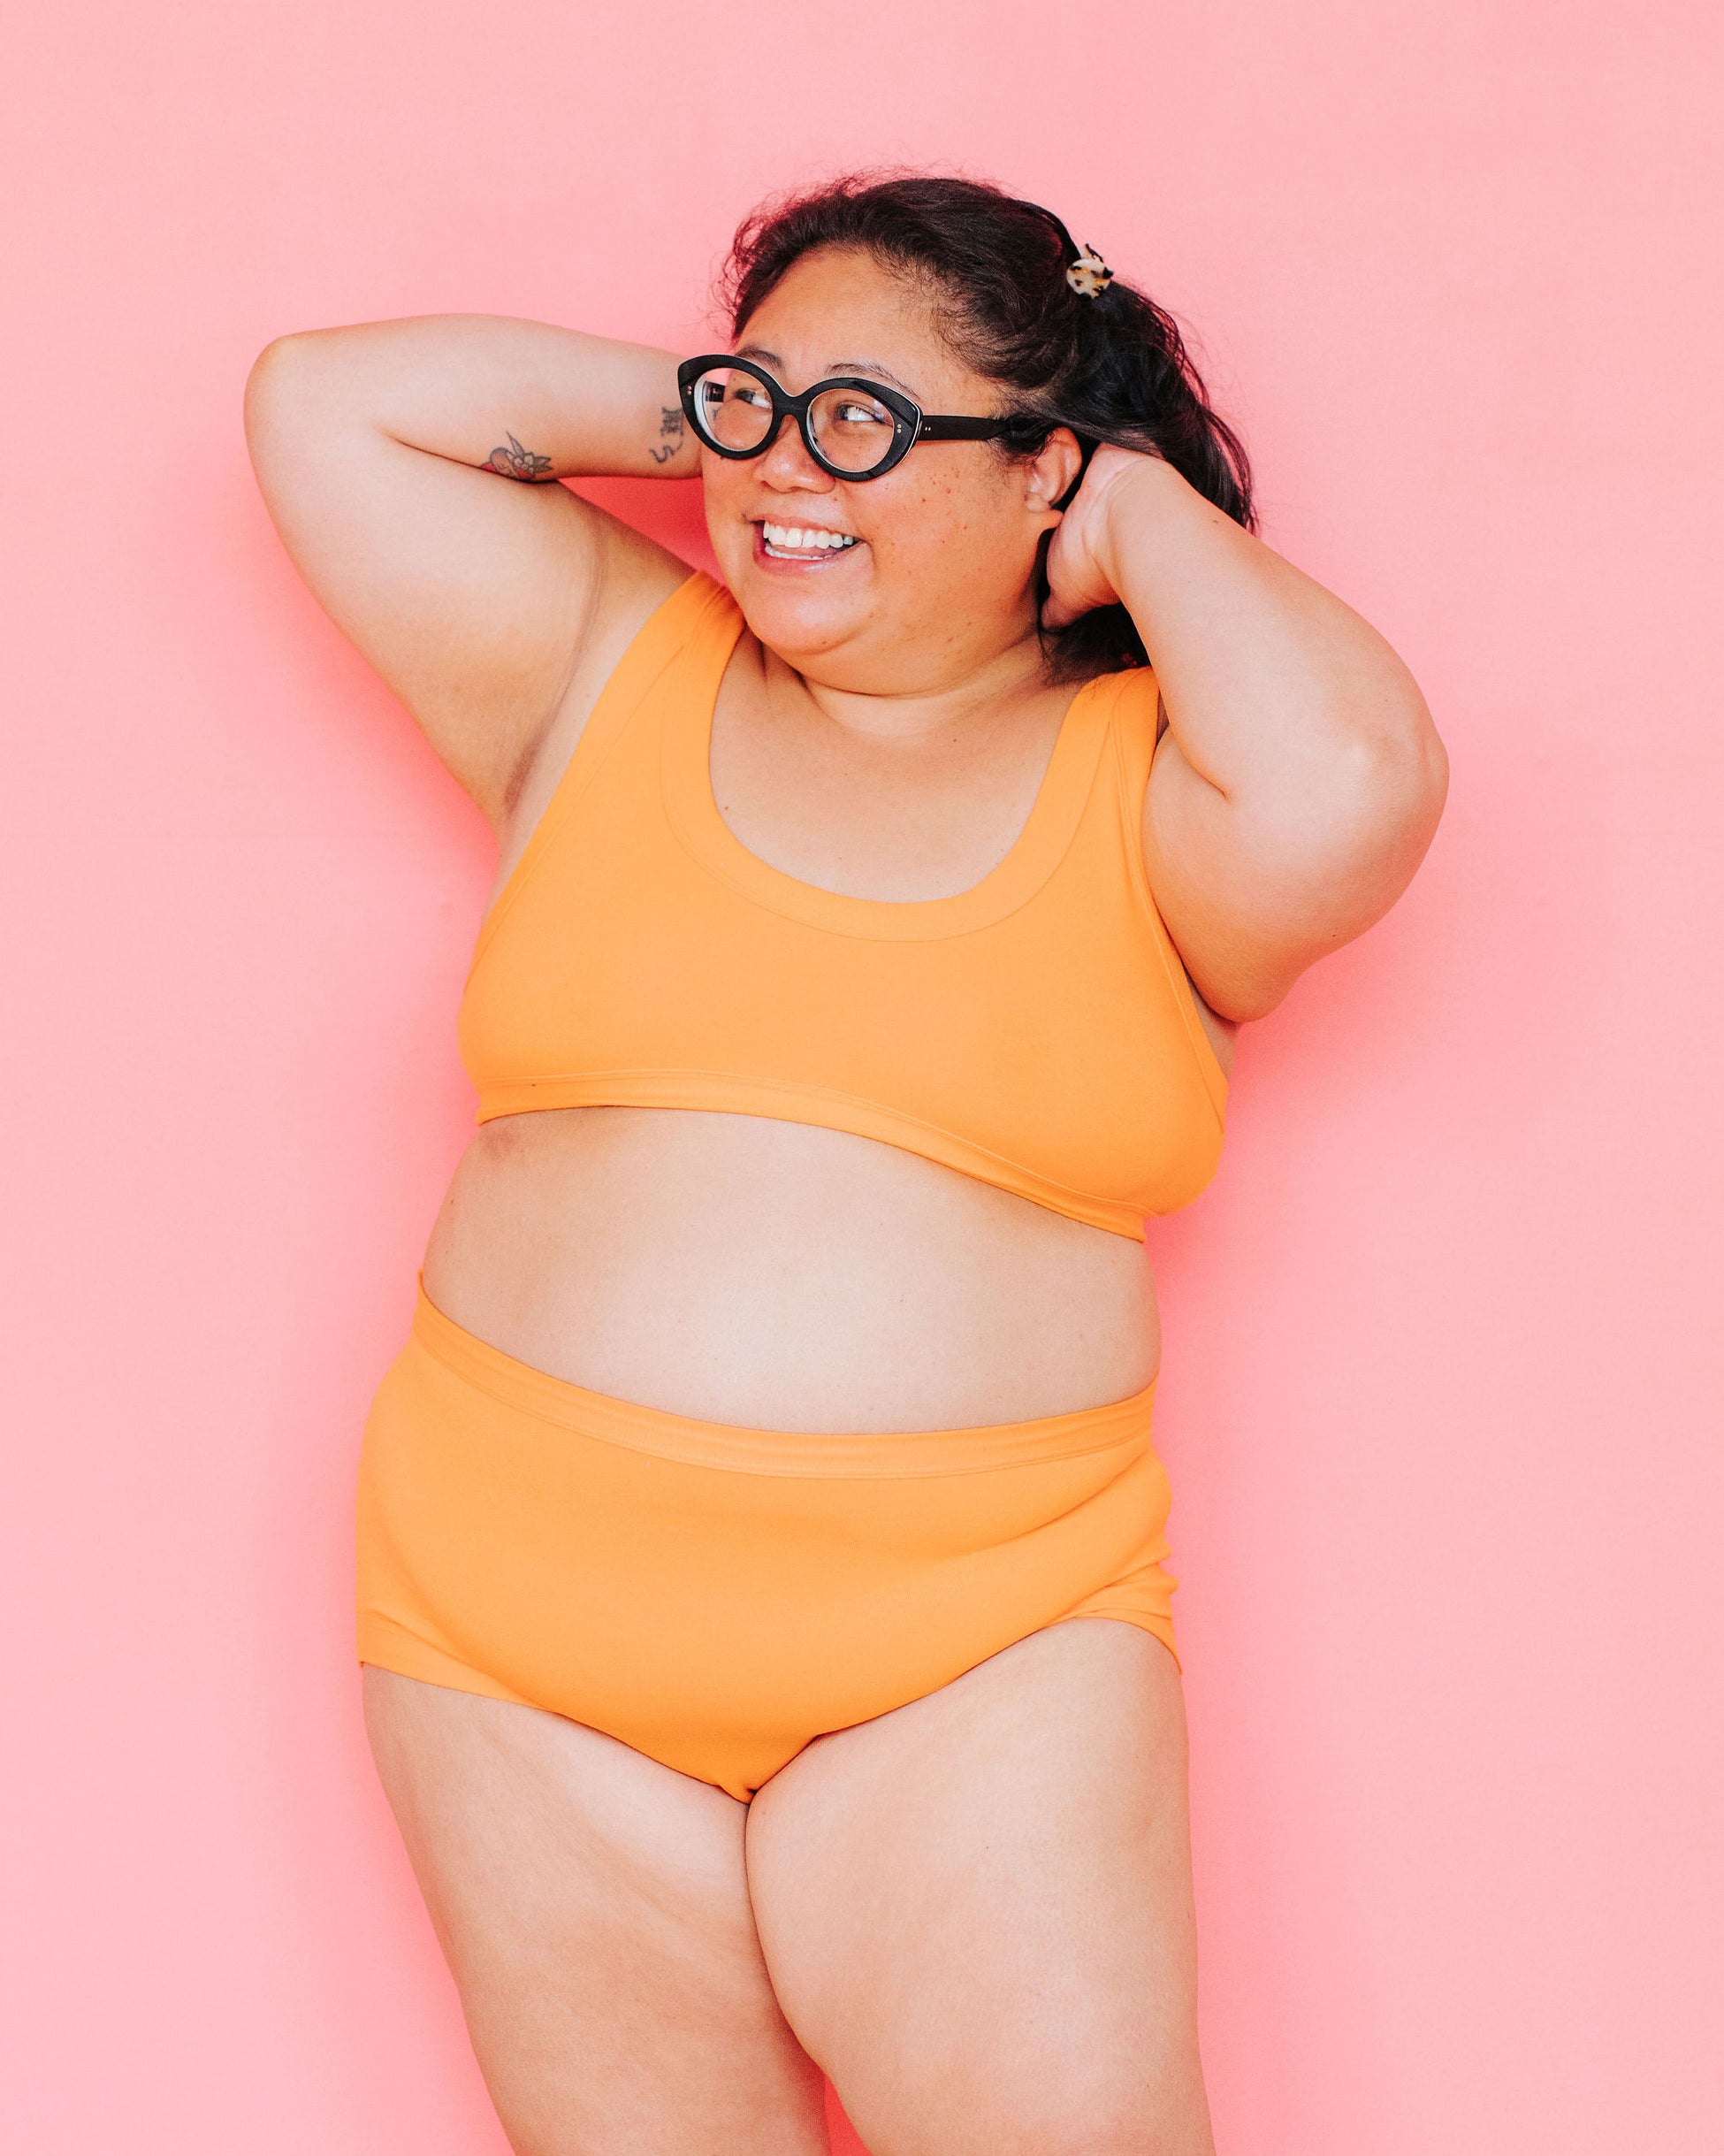 Model smiling in front of a pink background wearing the Original style underwear and a Bralette in the orange color Oregon Sunstone.